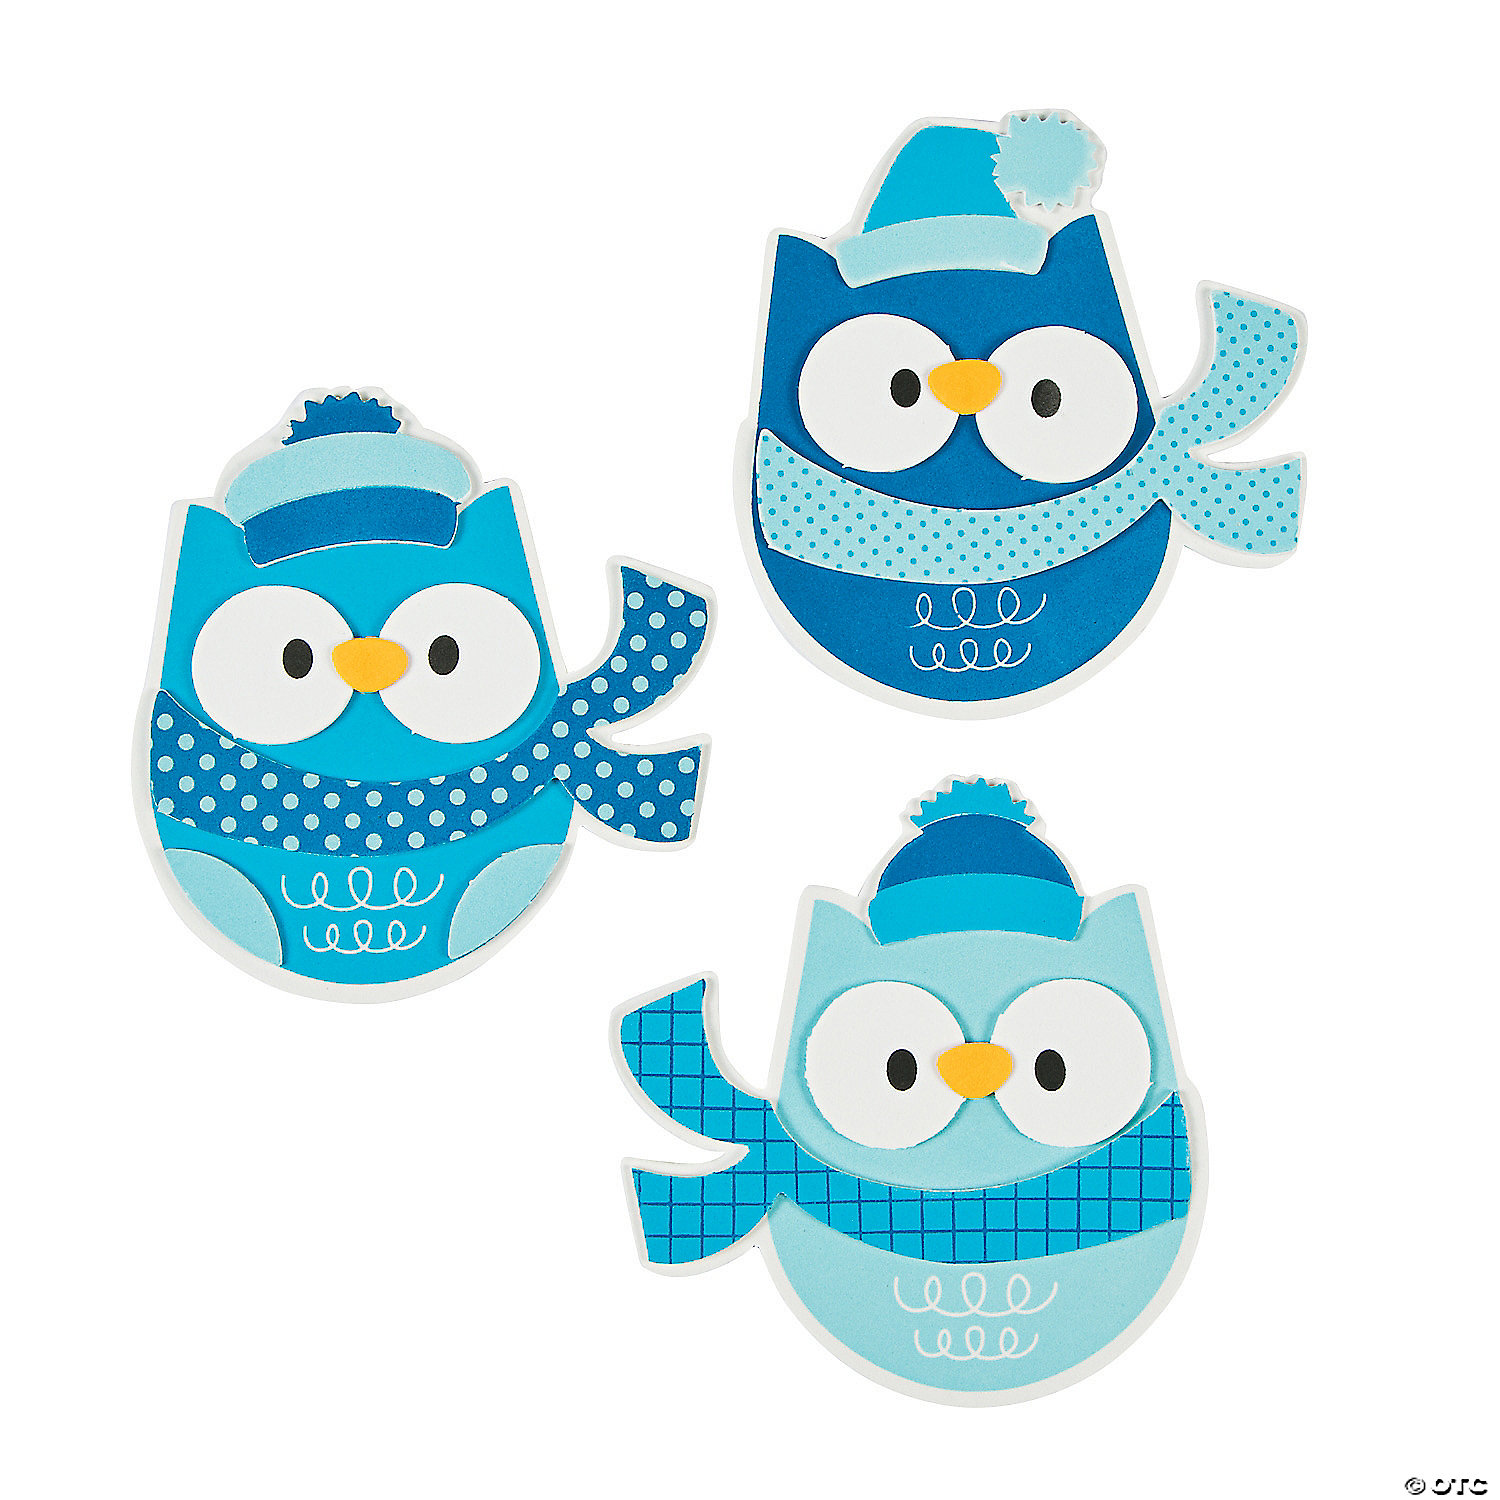 Winter Owls with scarves and hats